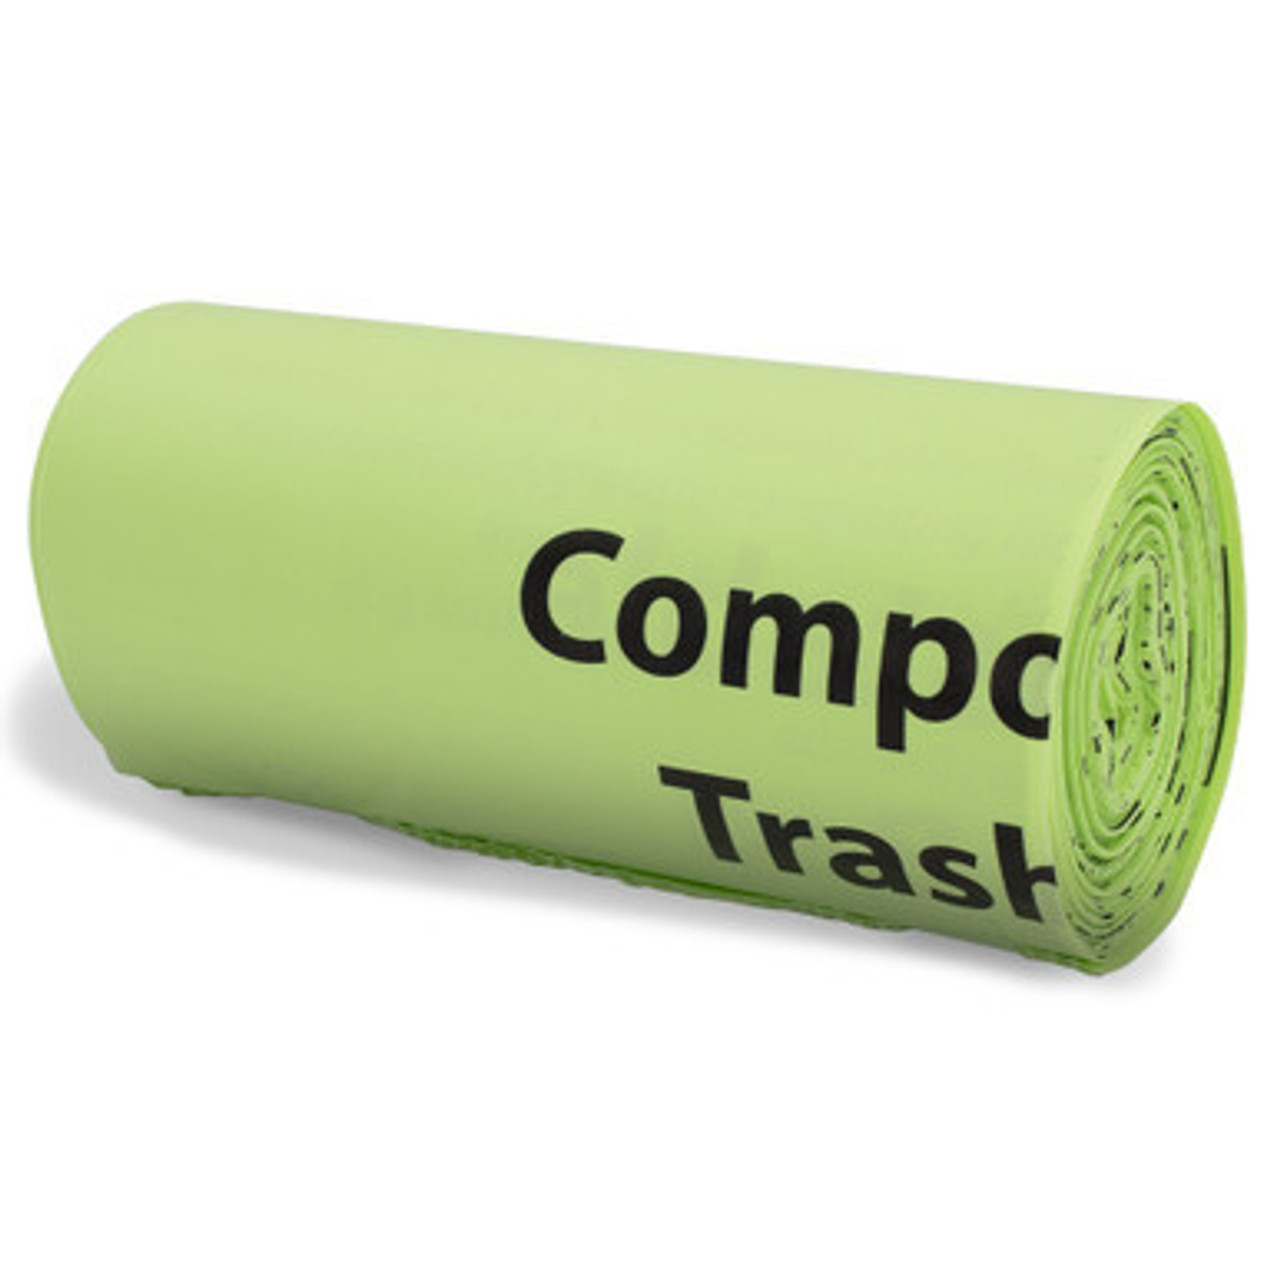 Compostable Waste Can Liner - XL (45-55 gallon) Case of 100